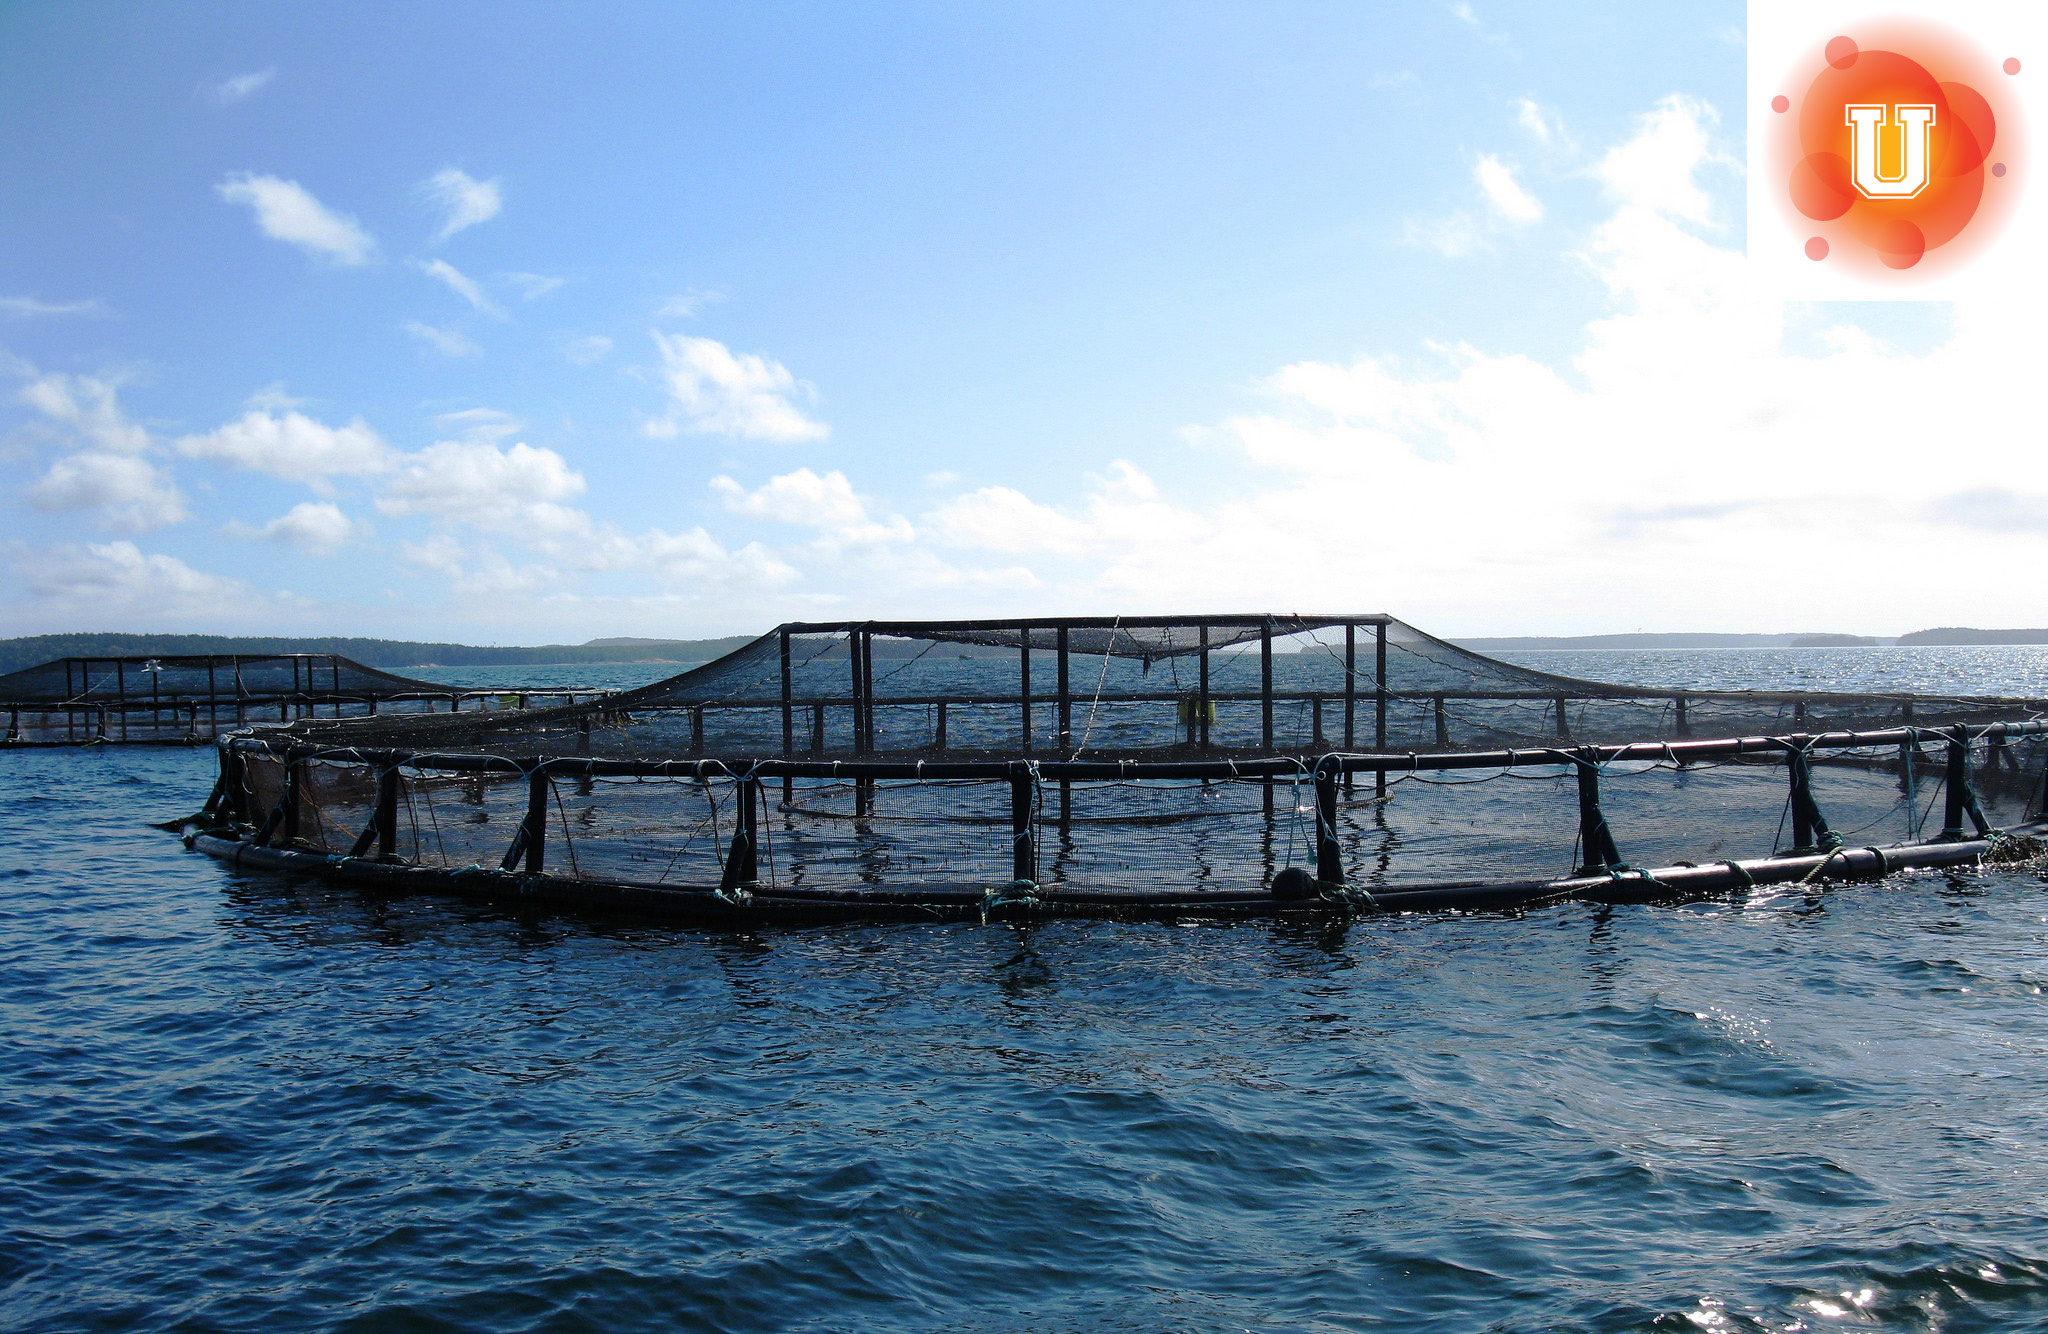 Do the Benefits of Aquaculture Outweigh Its Negative Impacts ...